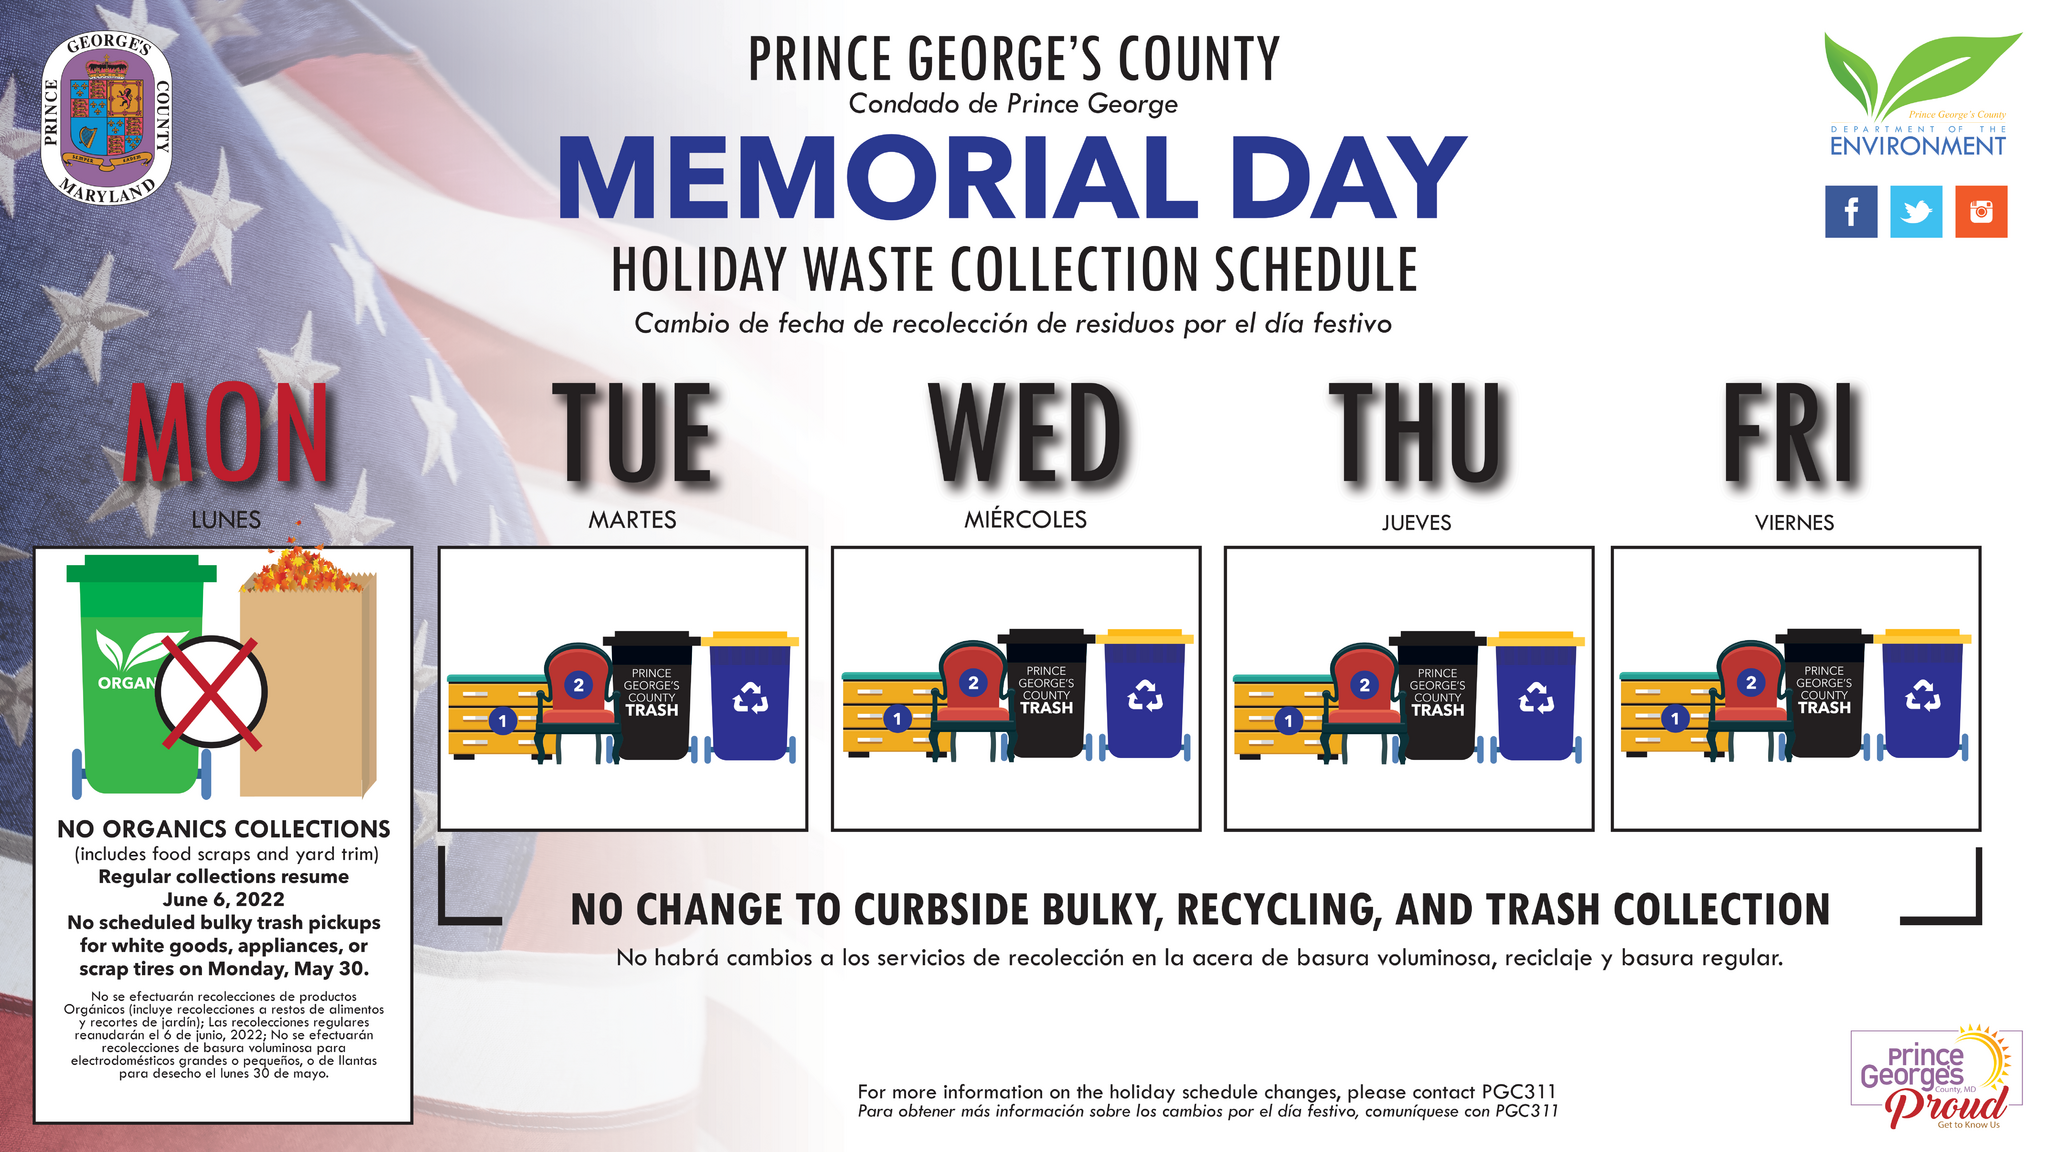 Holiday Waste Collection Schedule for May 30th Memorial Day